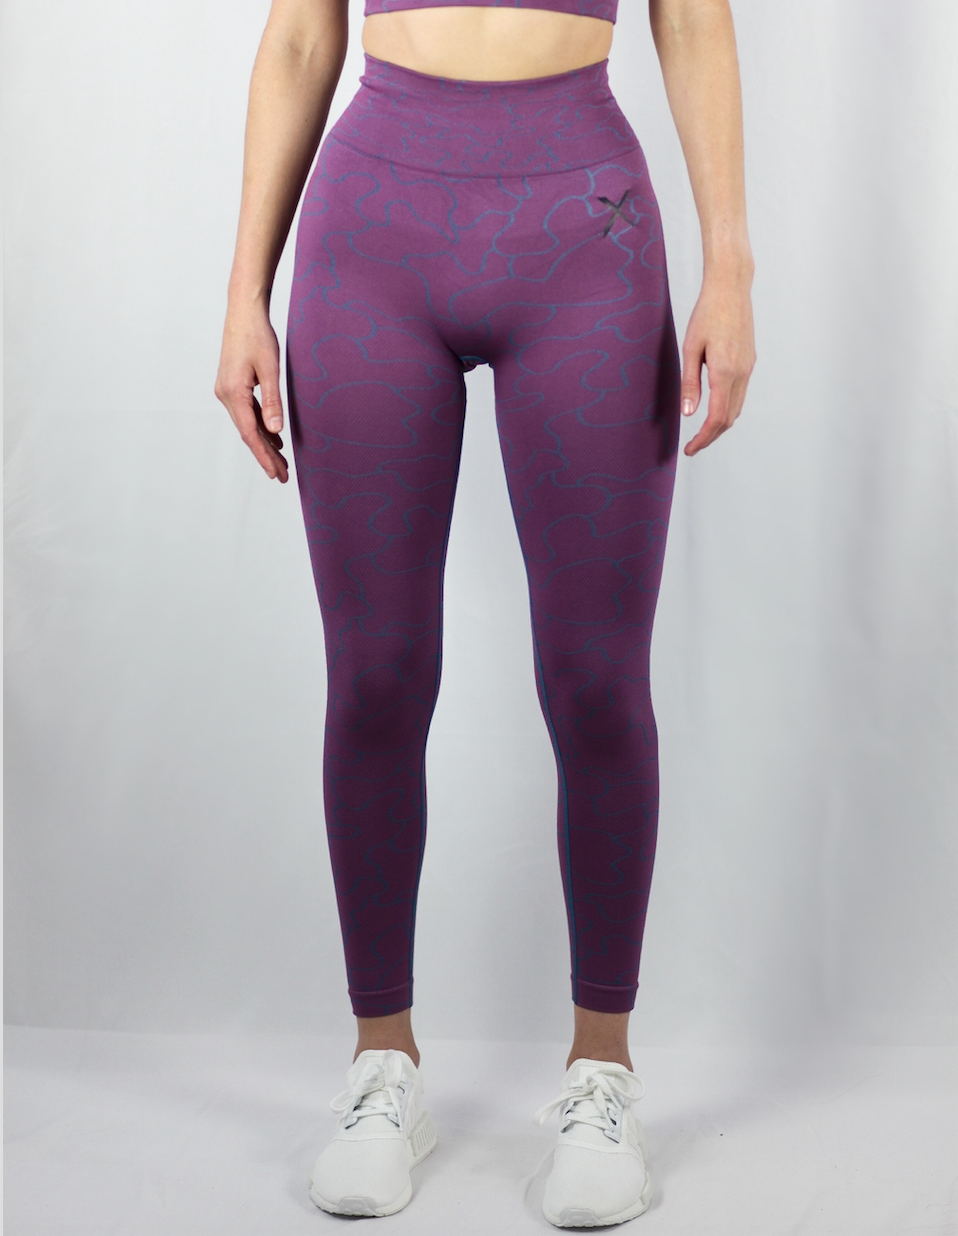 NWT All in Motion Sculpted Mesh Purple Camo Print High-Waisted 7/8 Leggings  XS